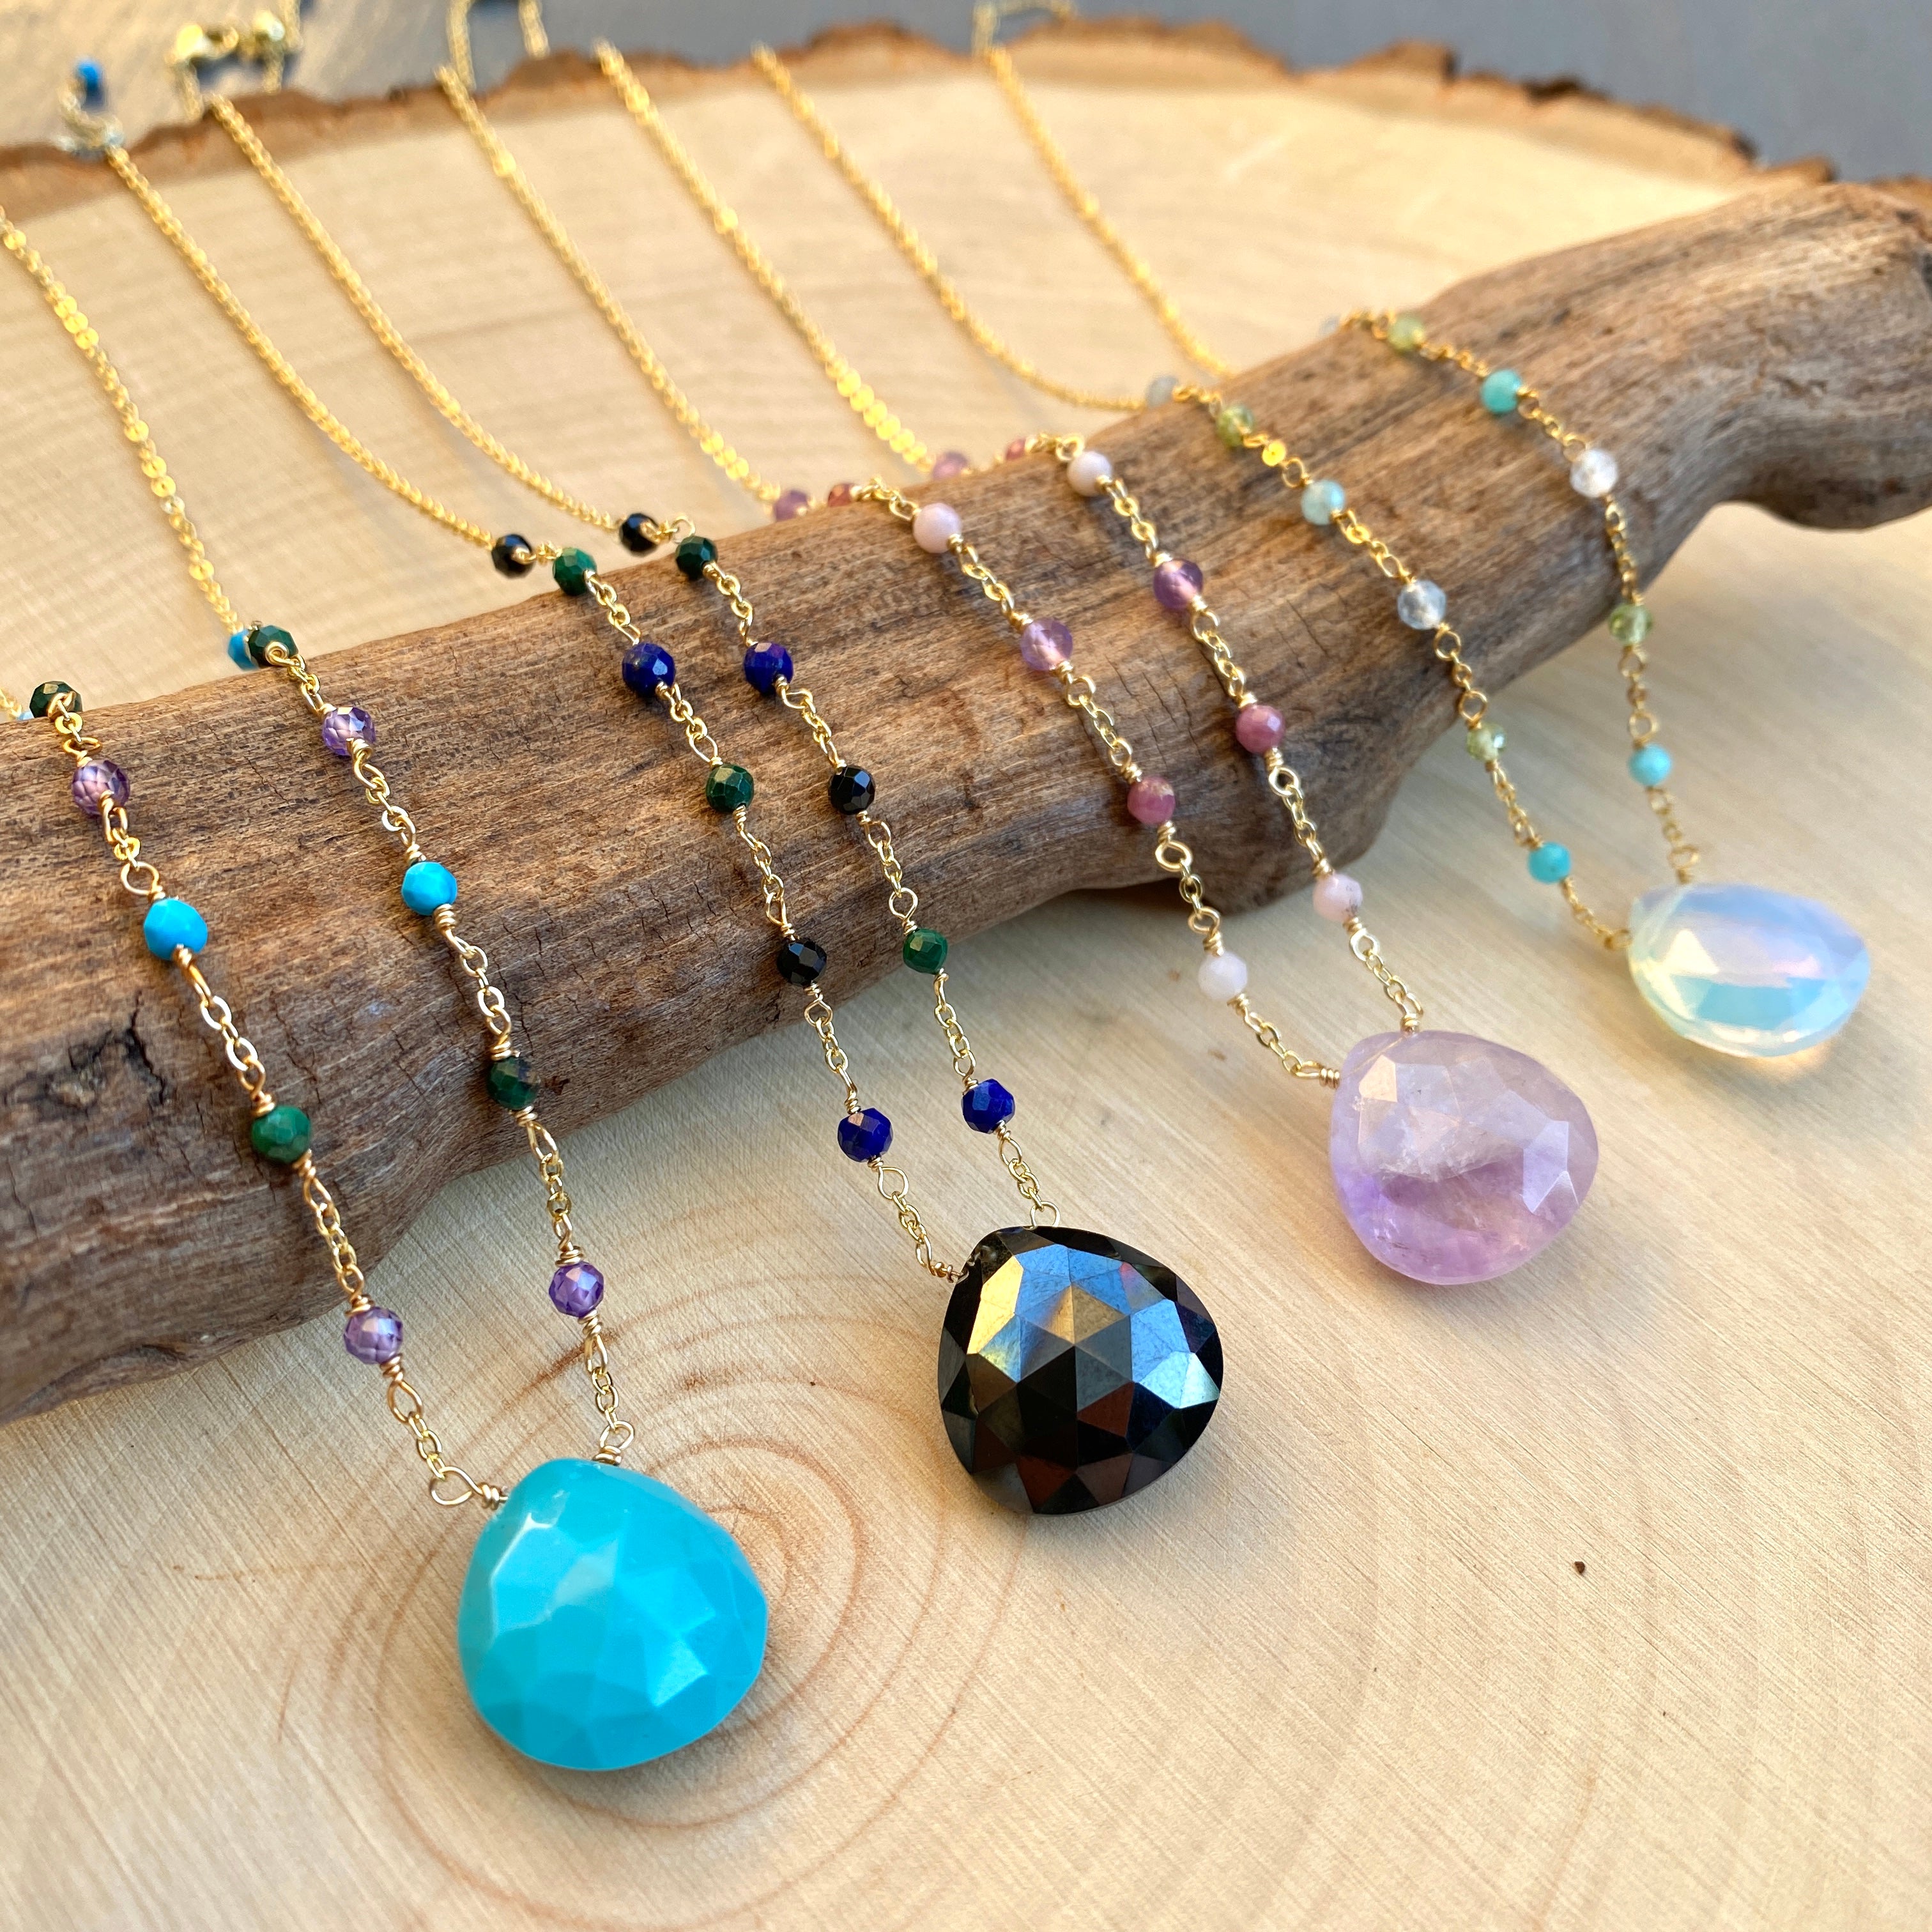 The Calming & Soothing Necklace